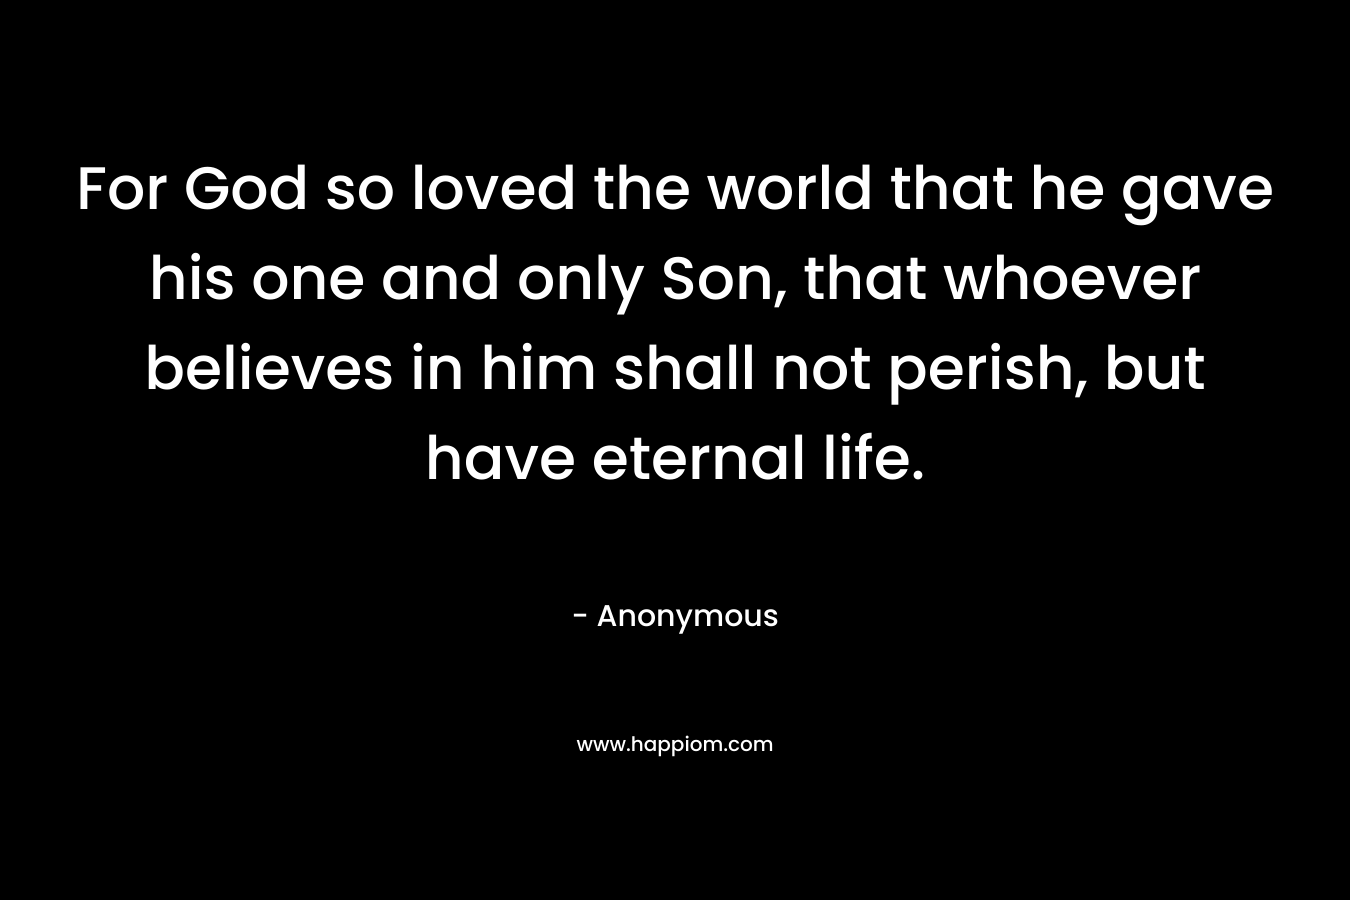 For God so loved the world that he gave his one and only Son, that whoever believes in him shall not perish, but have eternal life.